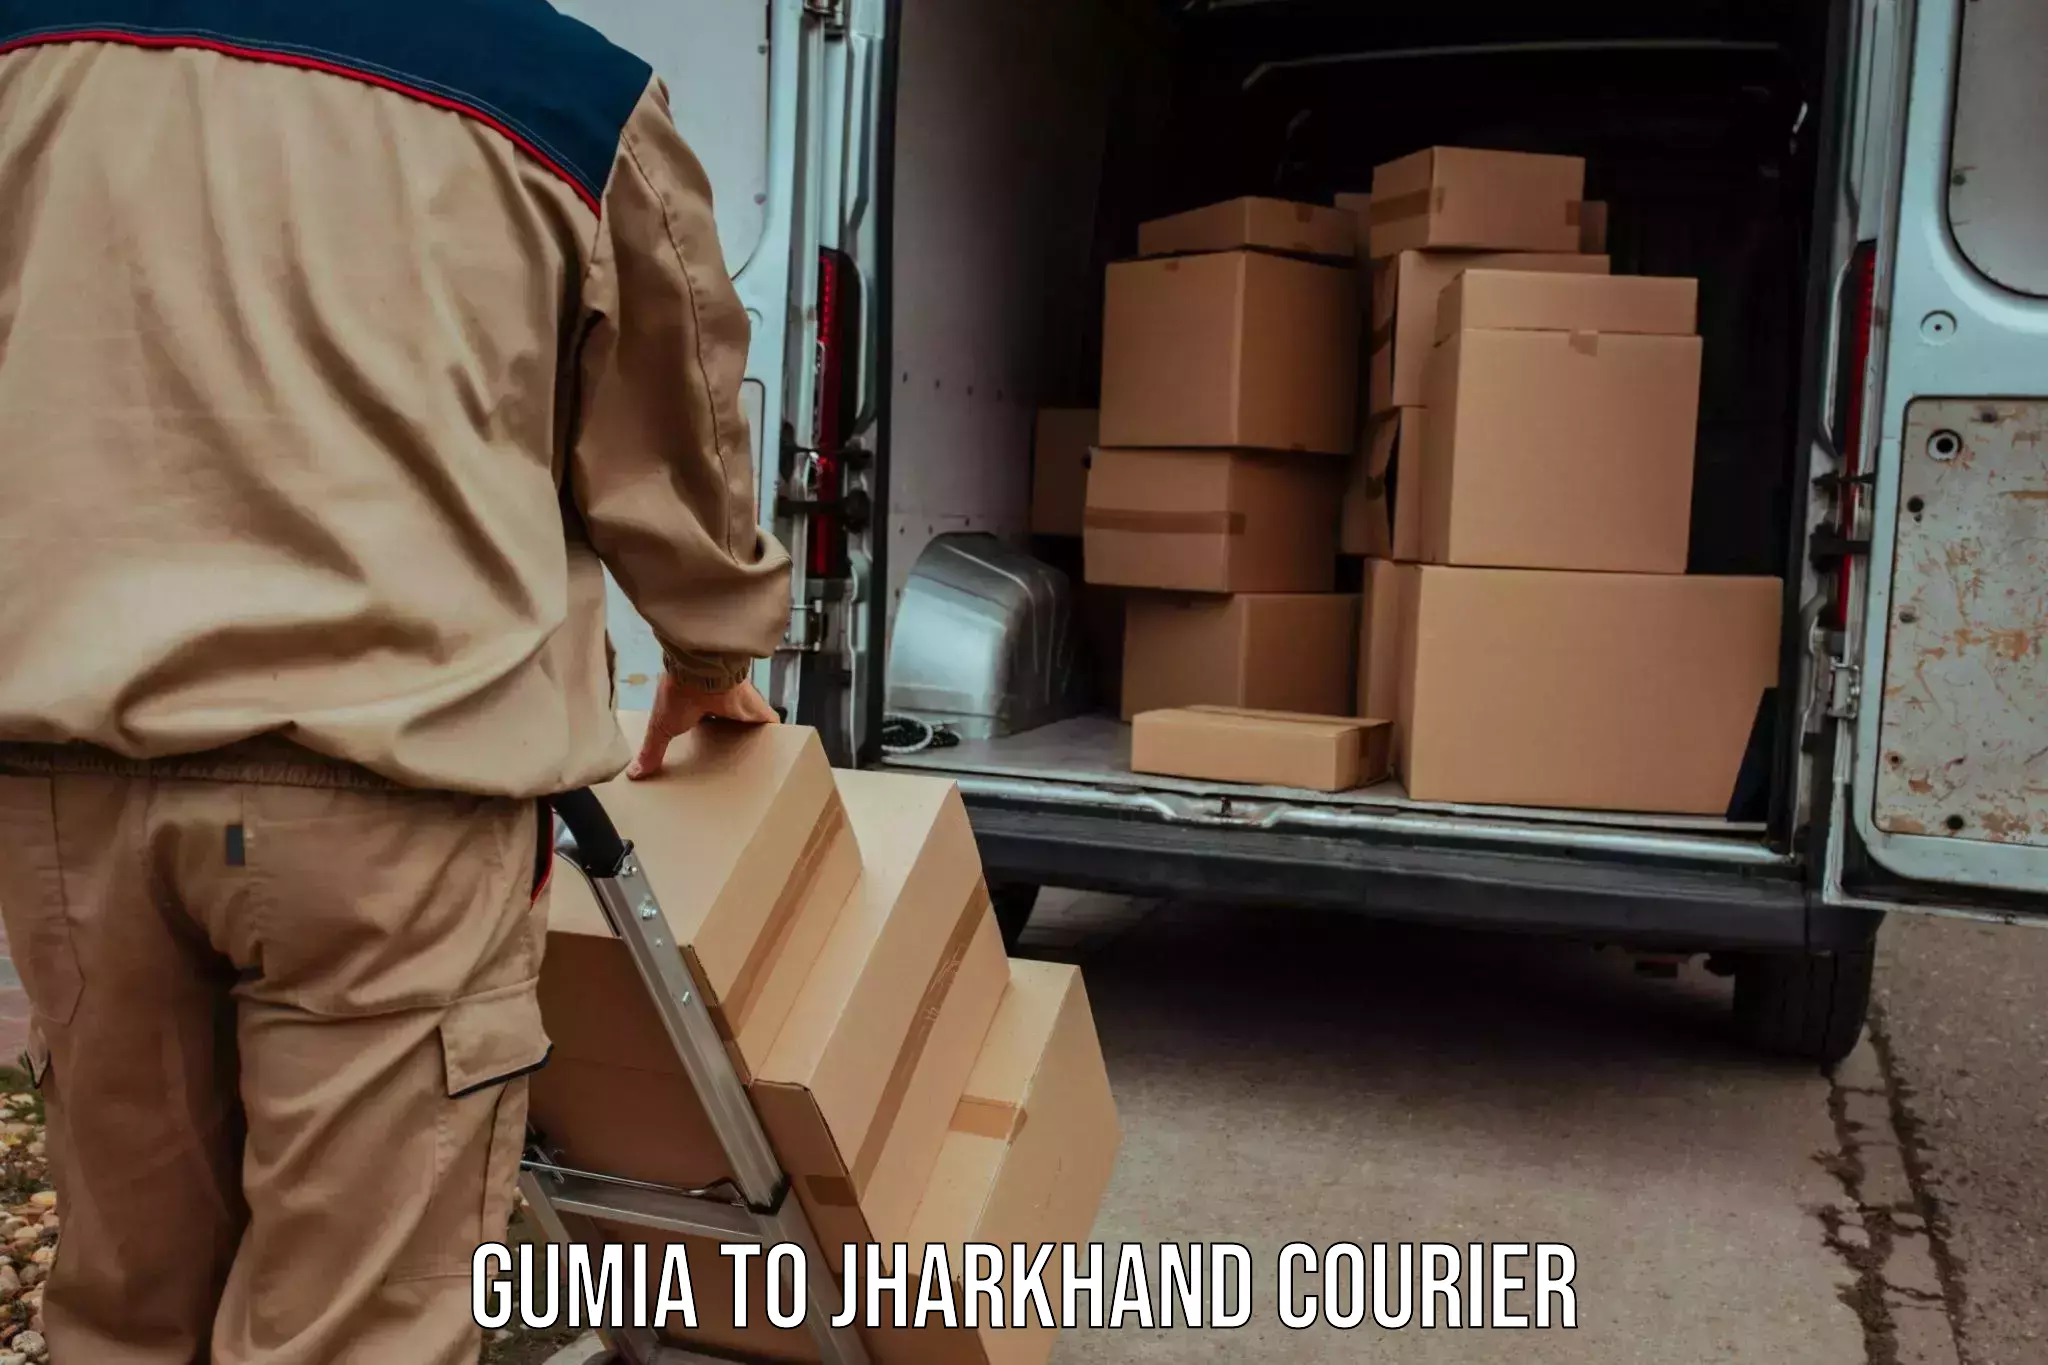 User-friendly courier app Gumia to Dhanbad